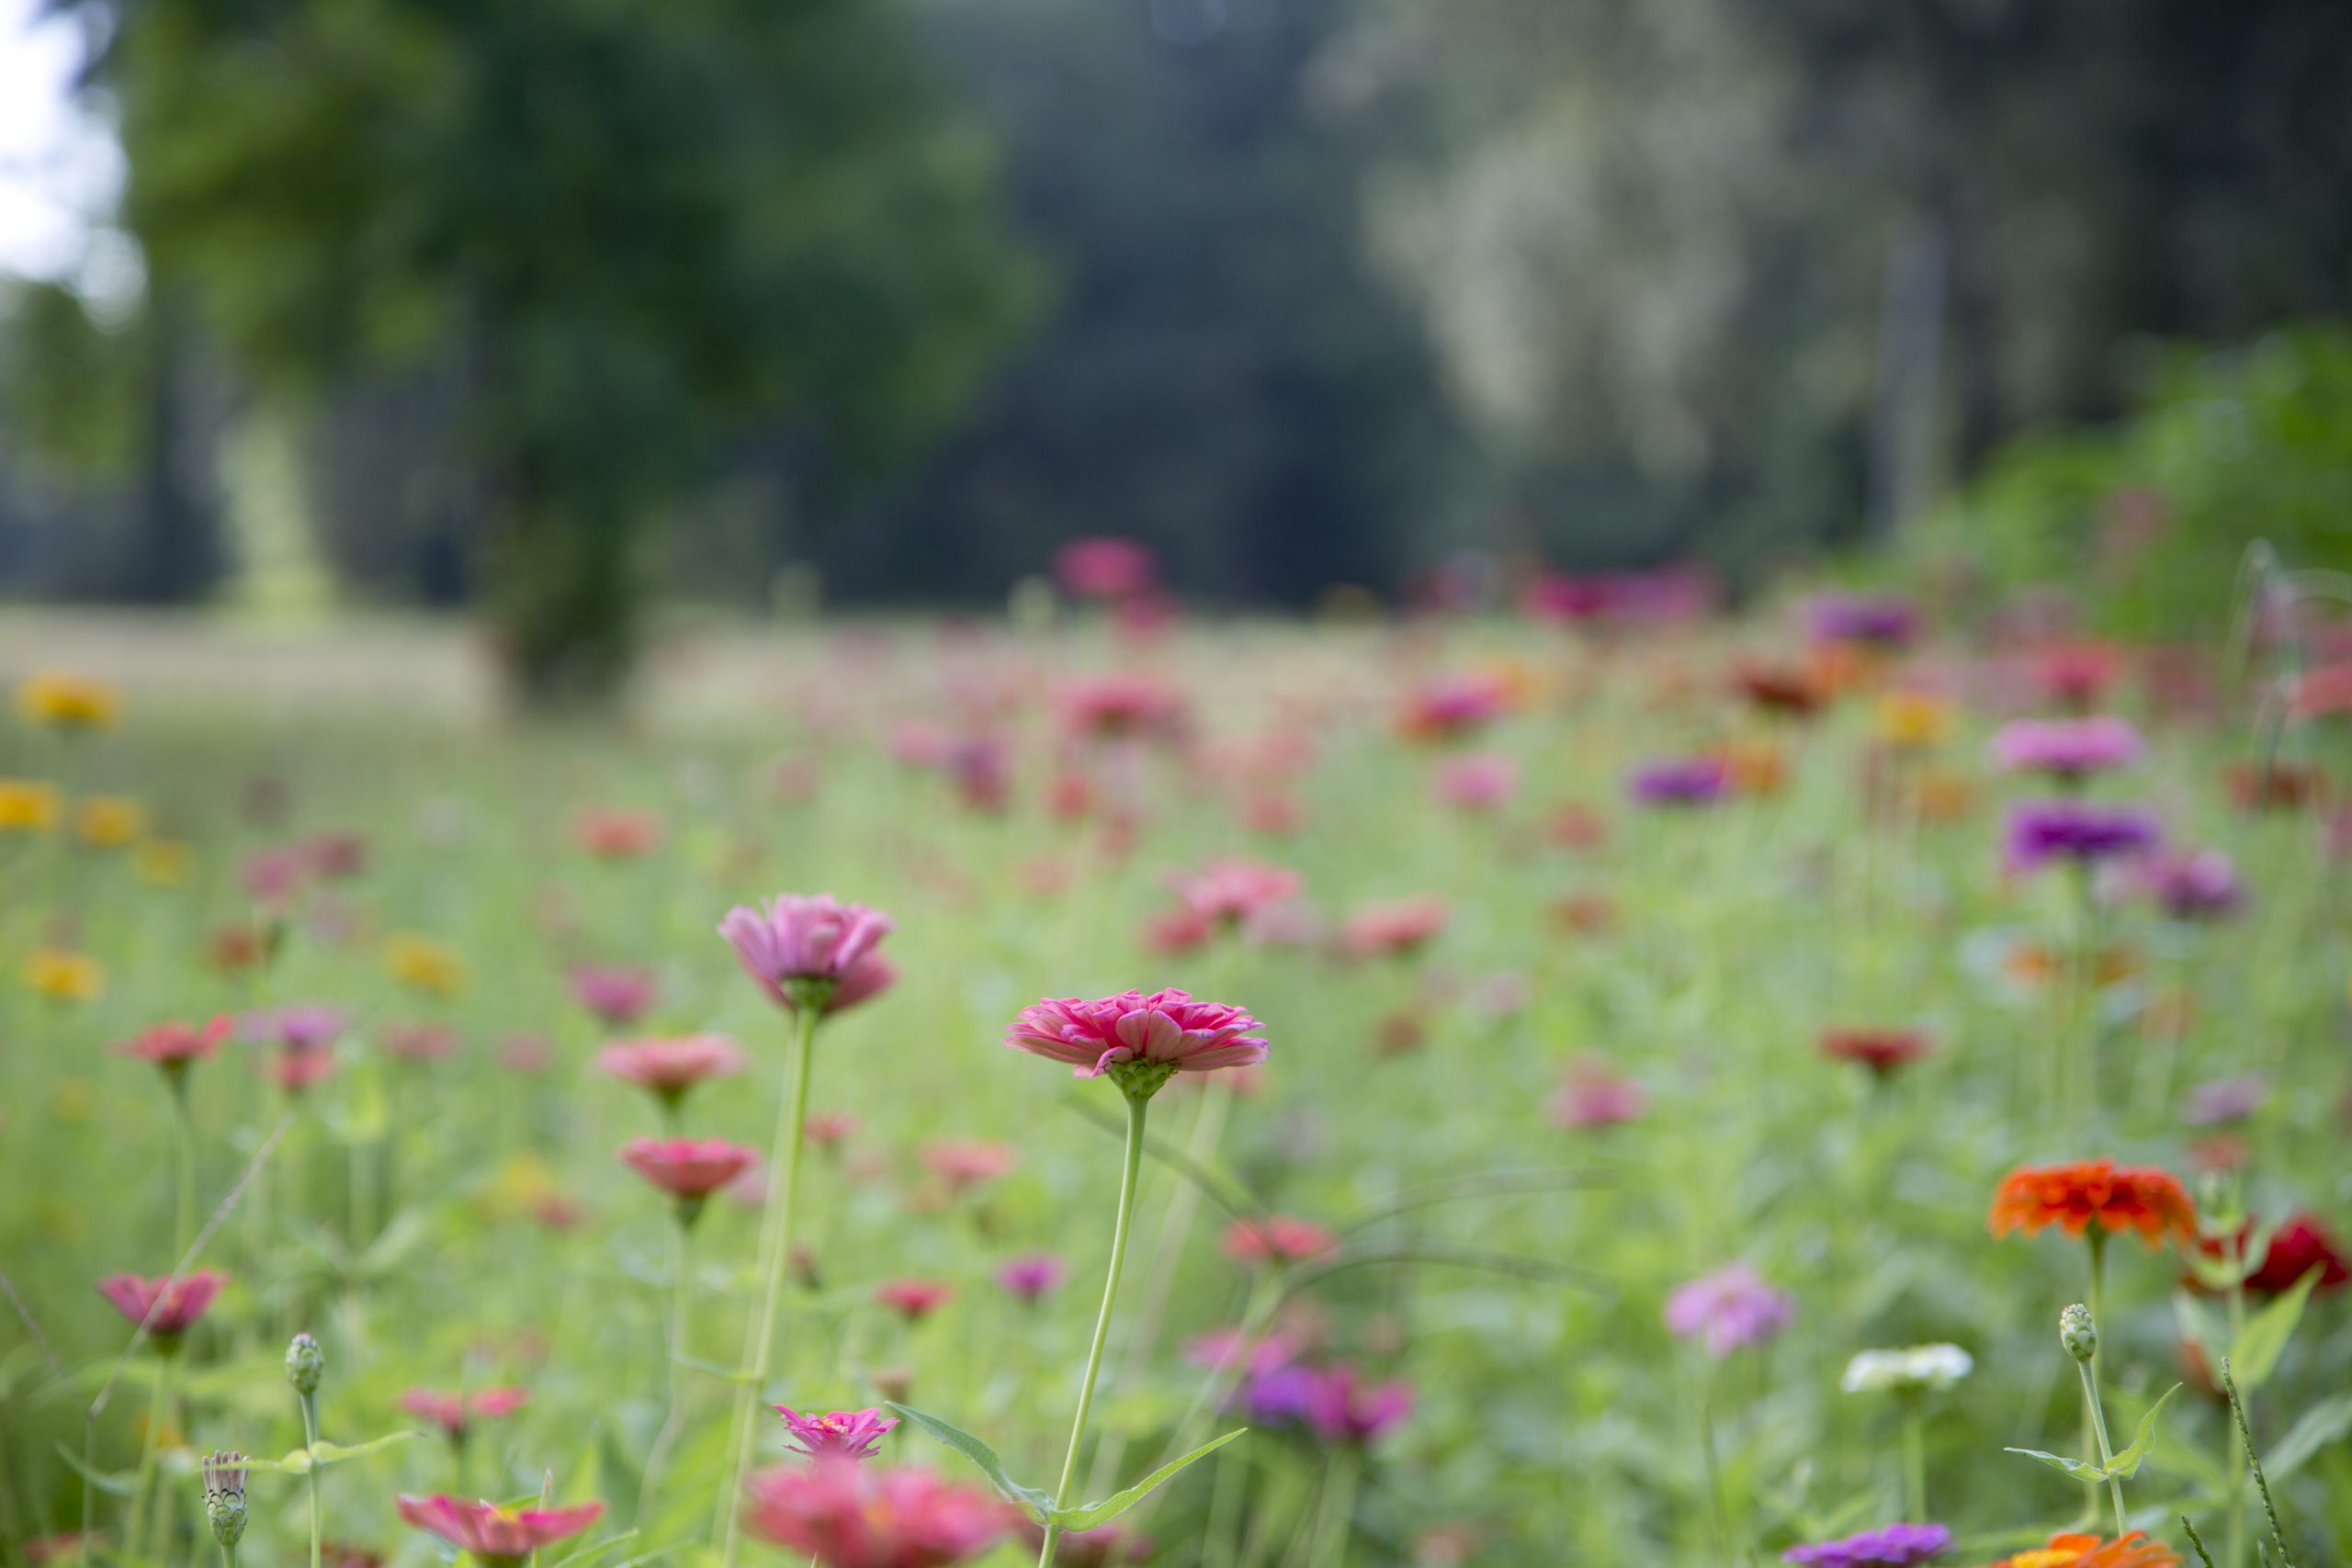 Zinnias are annuals, which means they will grow and bloom for one season.